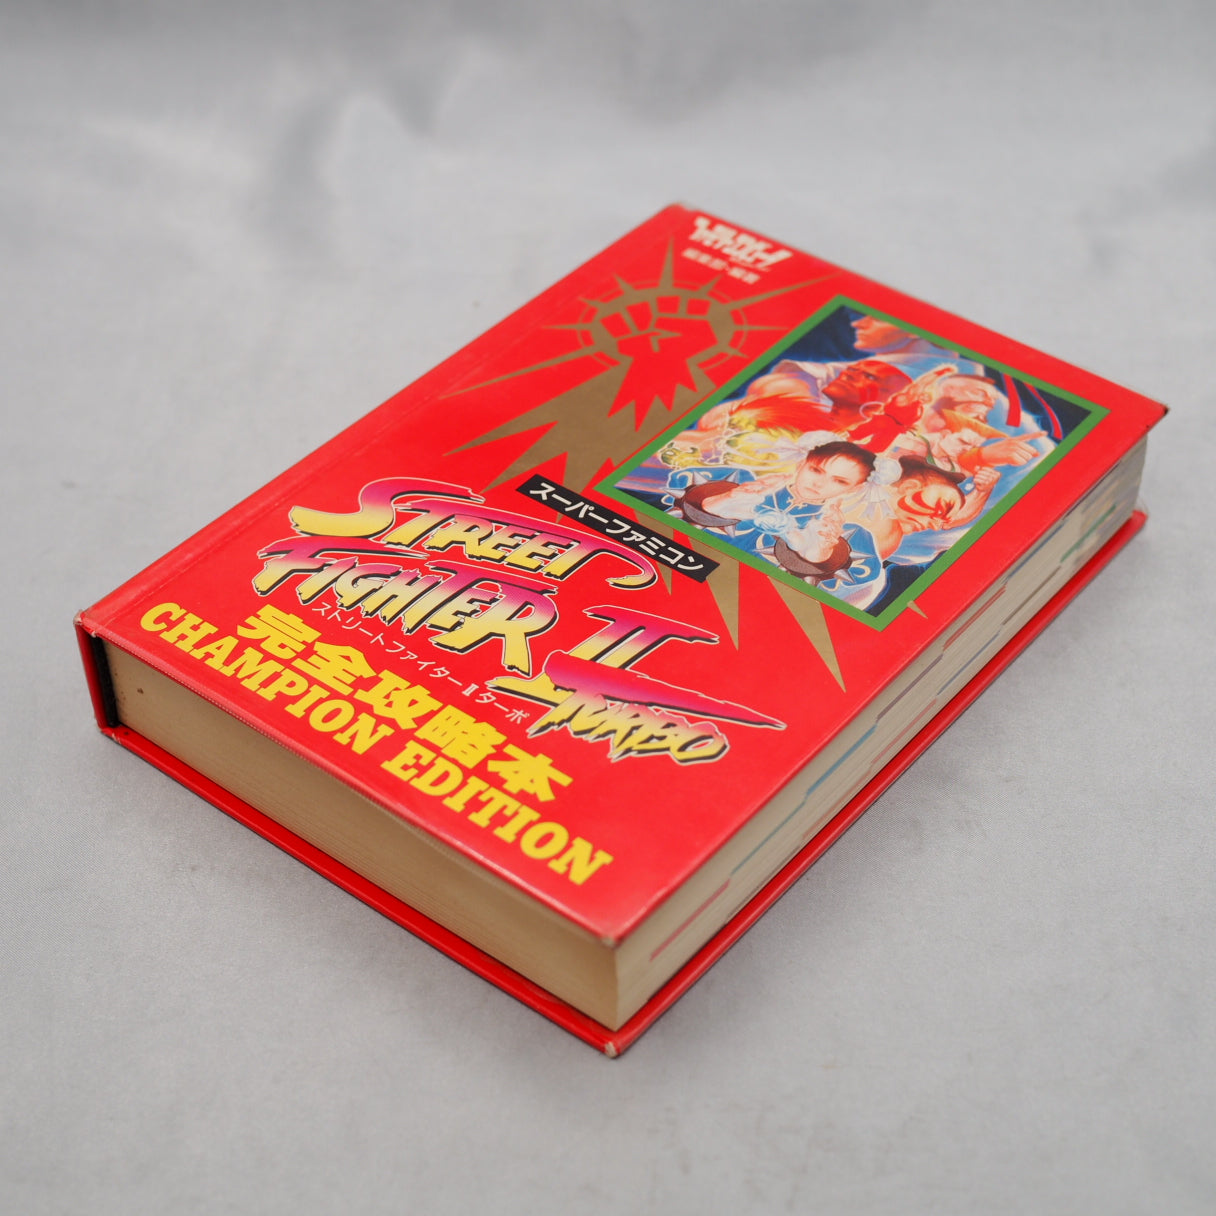 STREET FIGHTER II 2 TURBO Champion Edition Guide Book